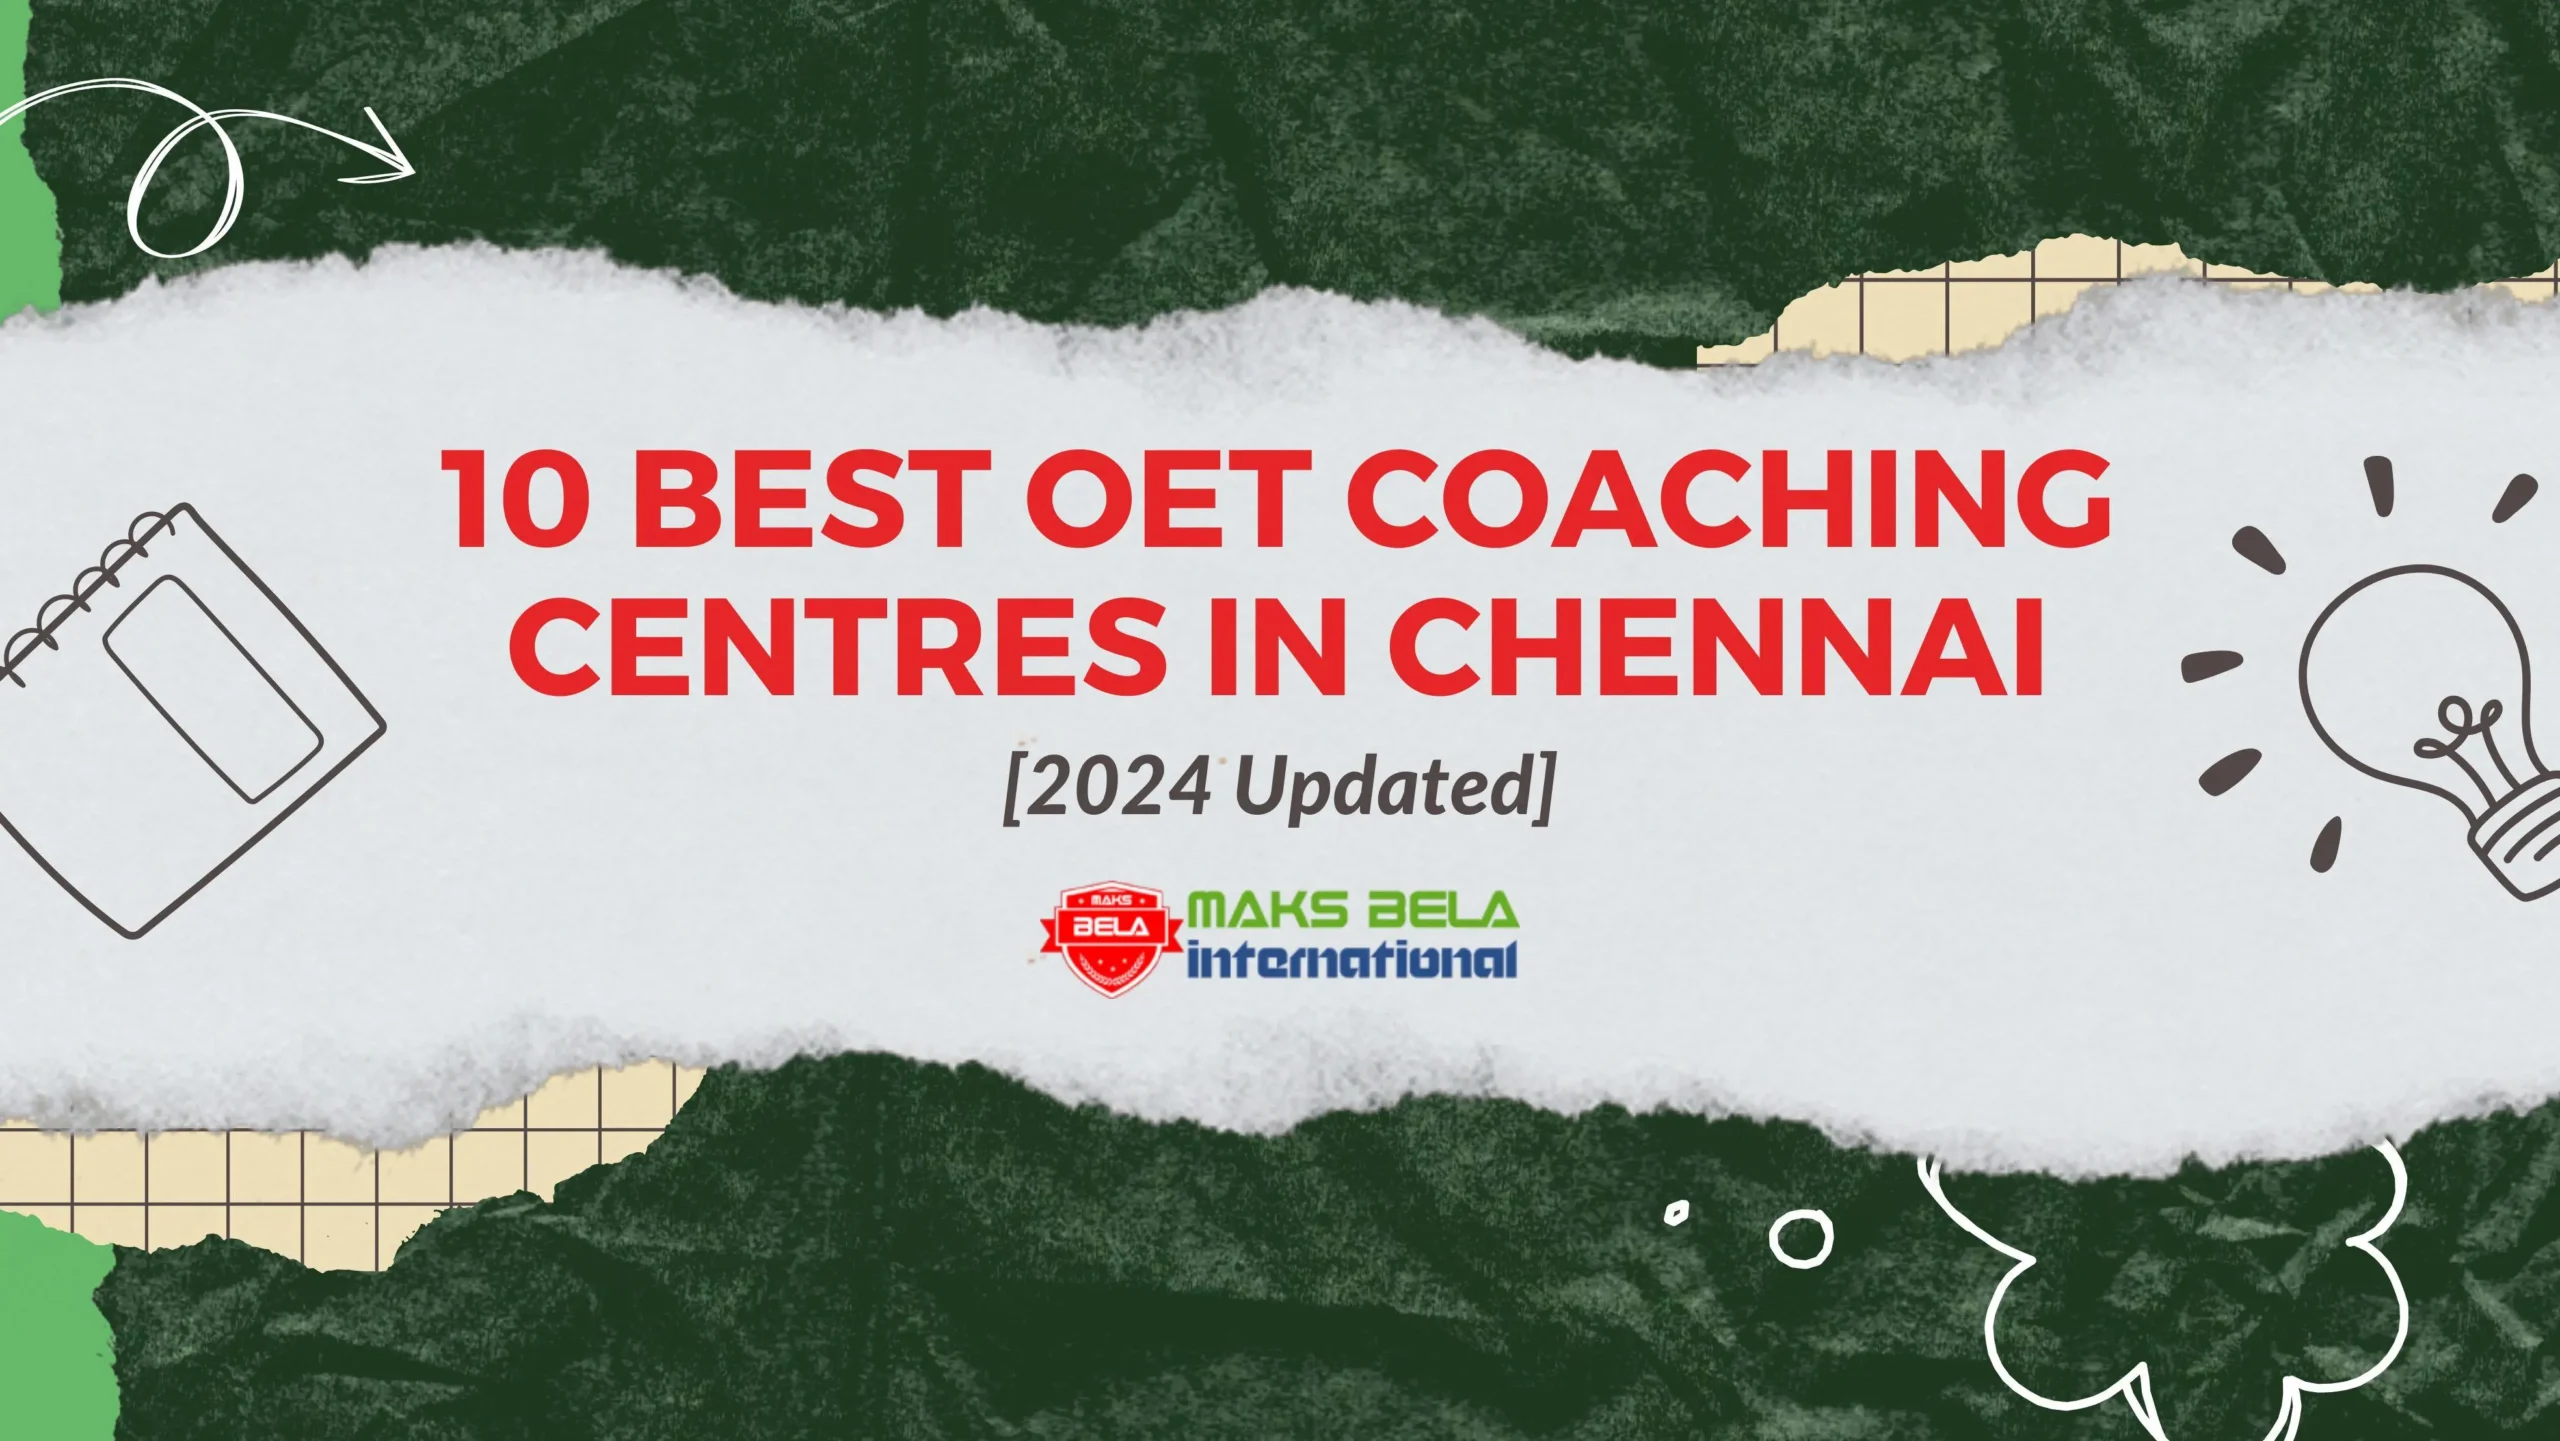 10 Best OET Coaching Centres in Chennai [2024 Updated]